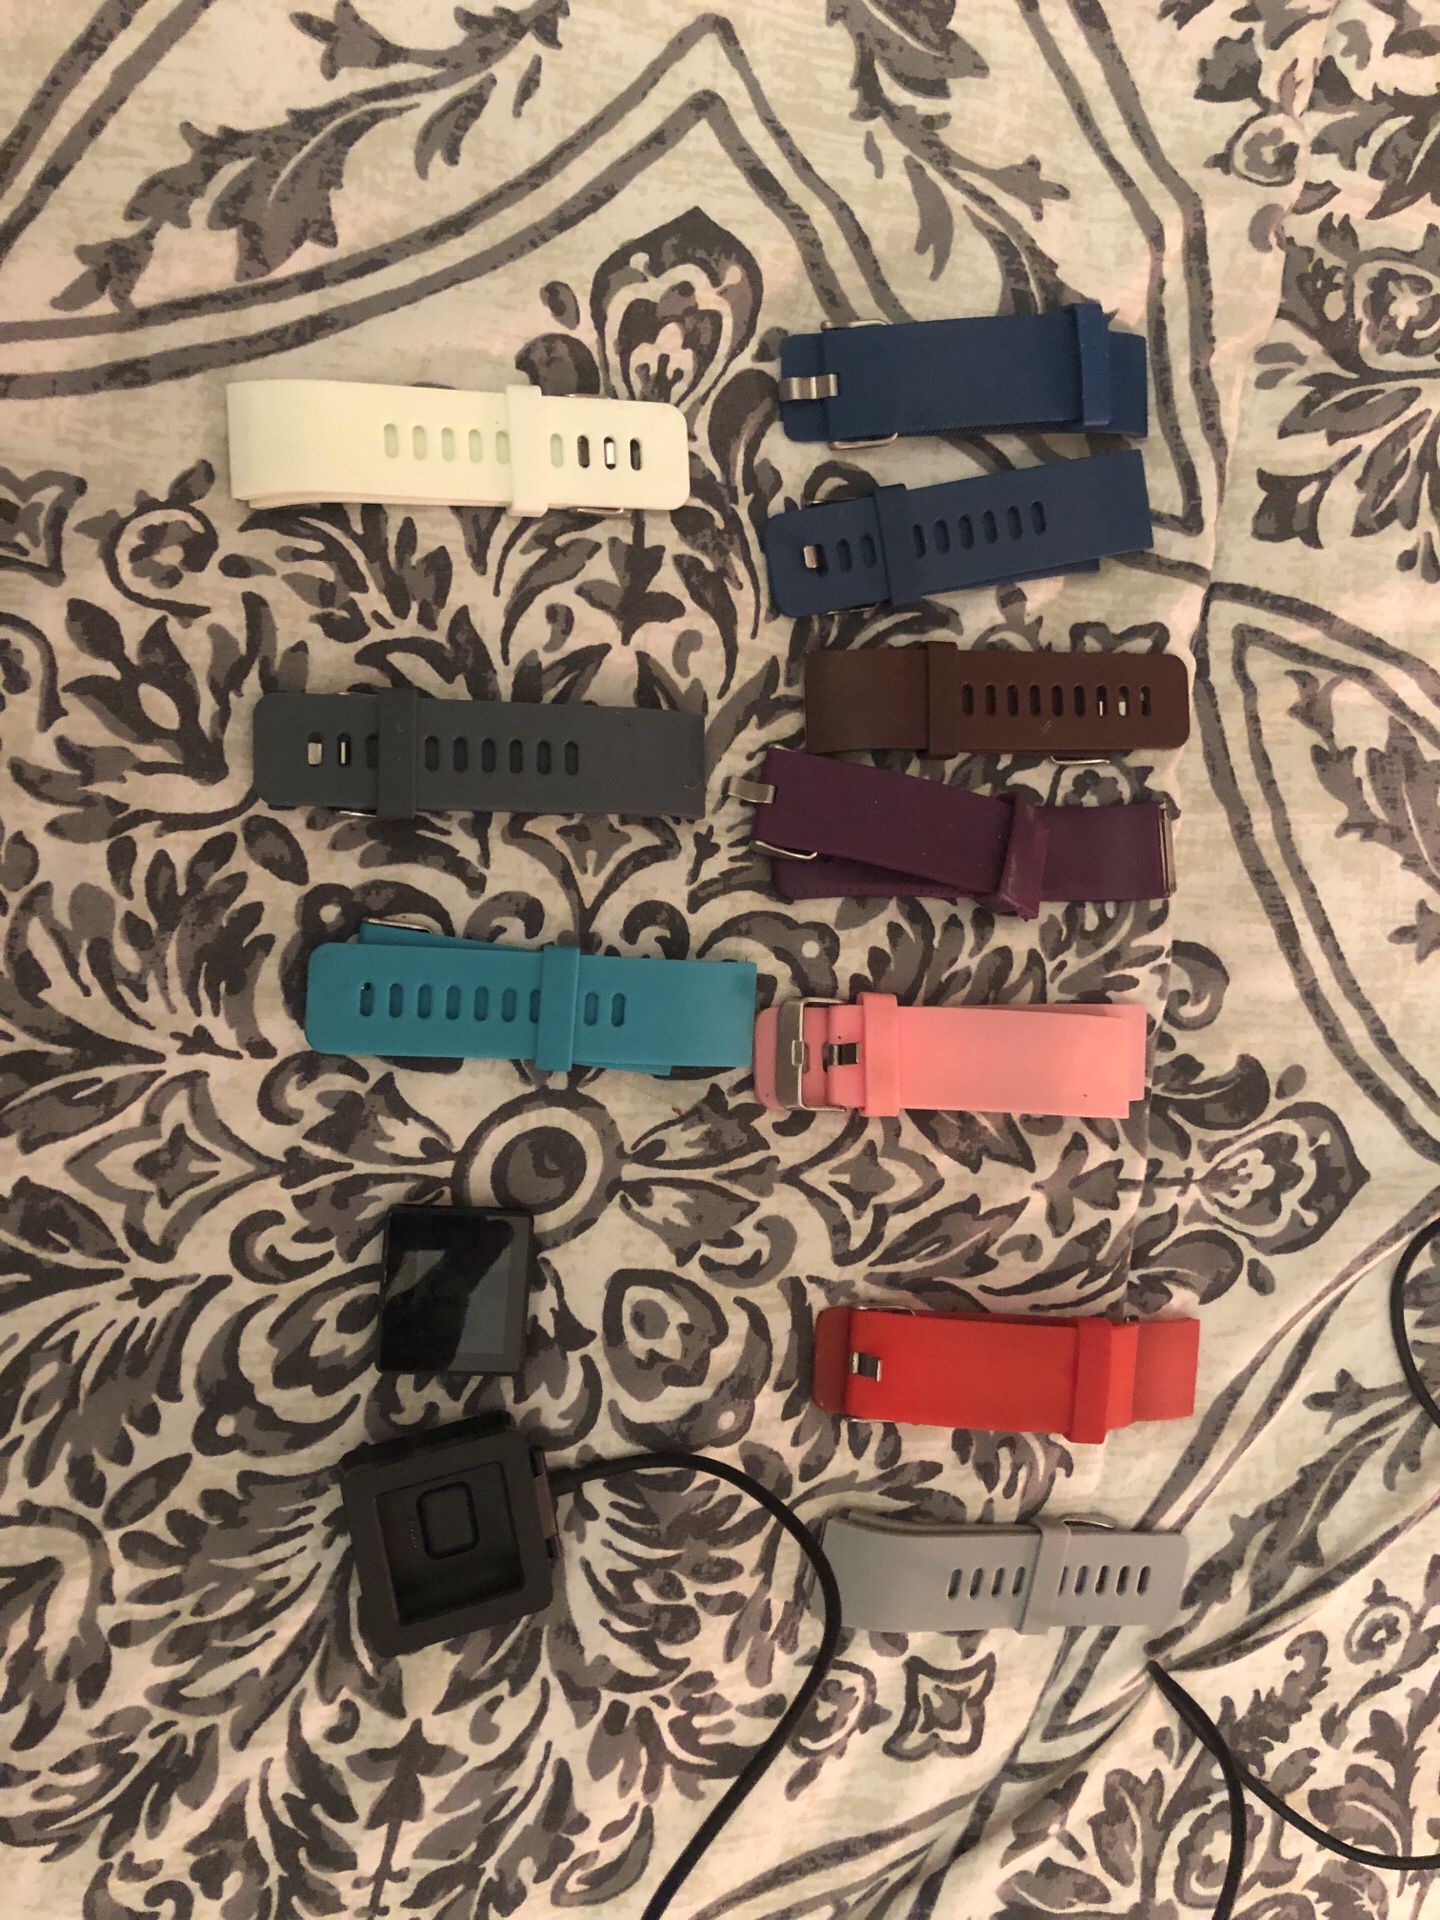 FitBit Blaze W/Charger and 10 assorted Bands